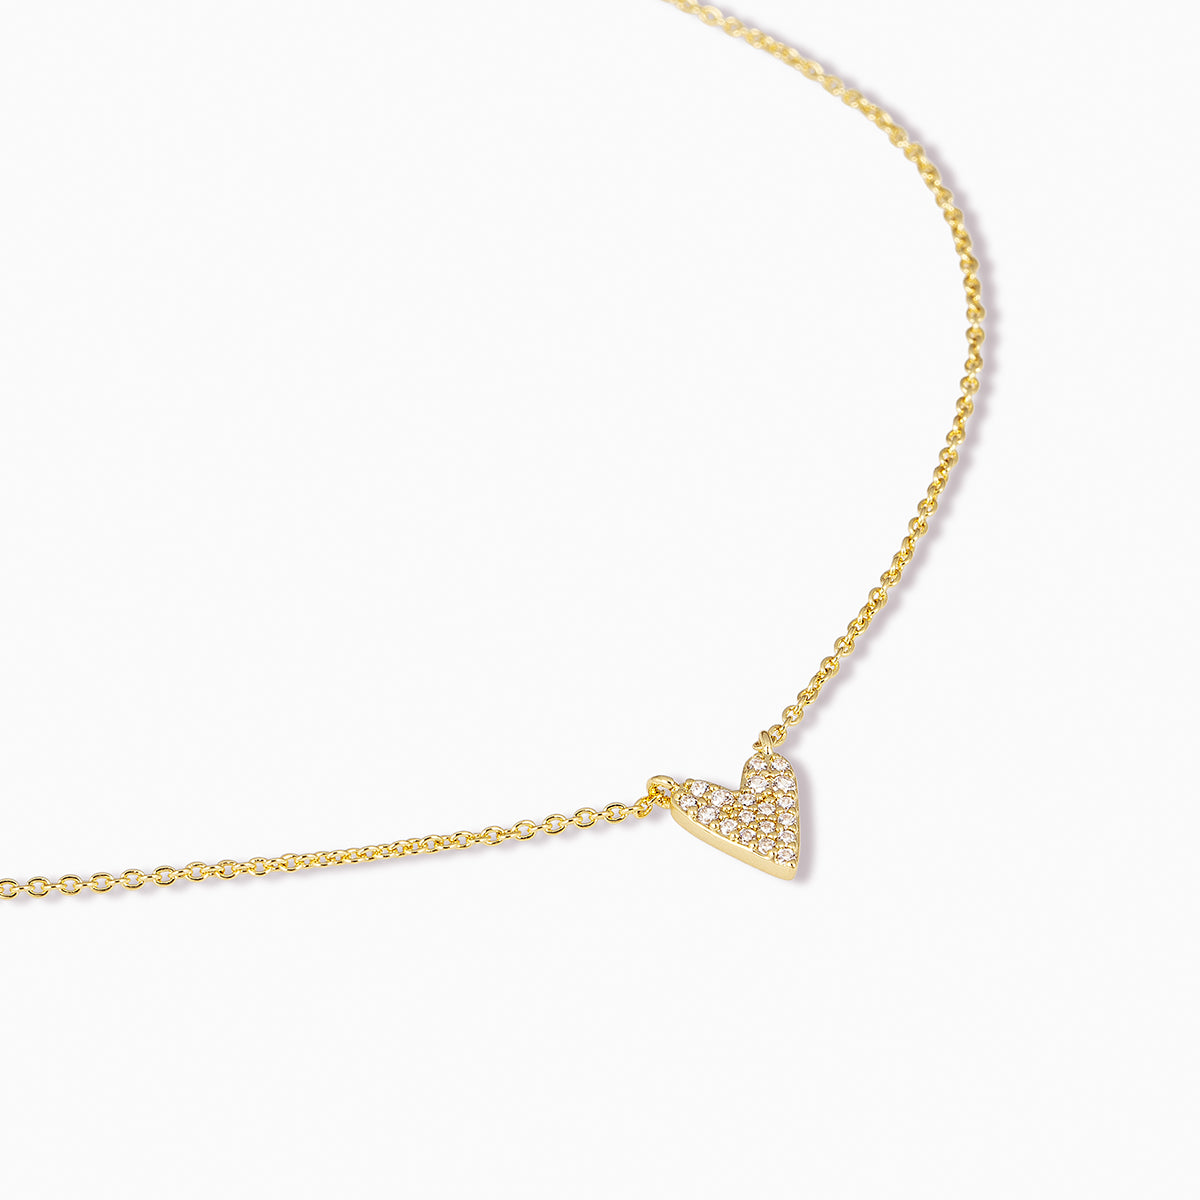 Full Heart Necklace | Gold | Product Detail Image | Uncommon James